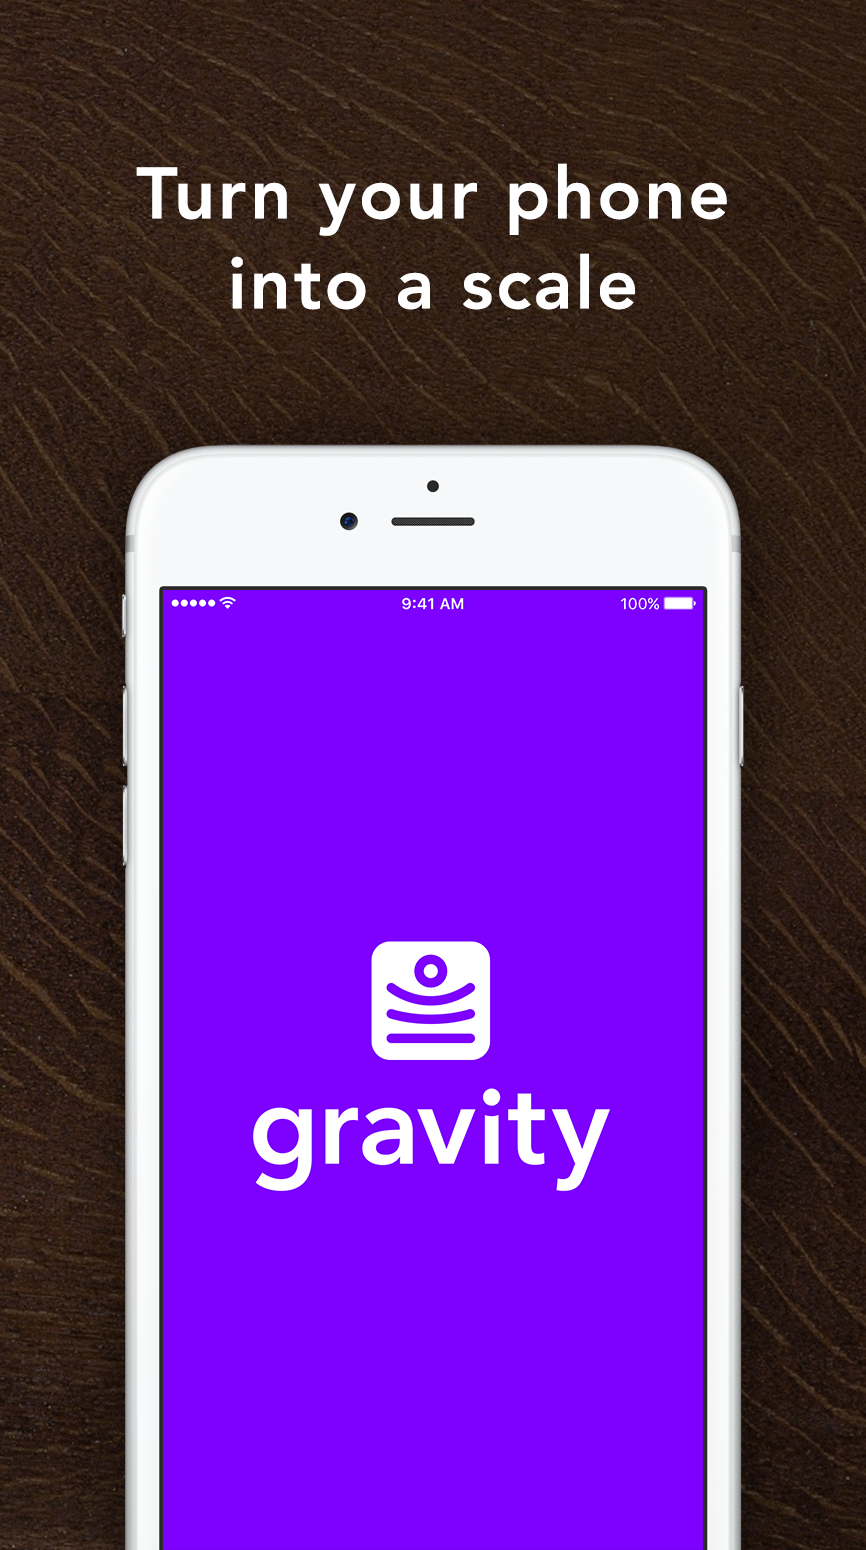 Gravity app turns your iPhone into a WEIGHING SCALE